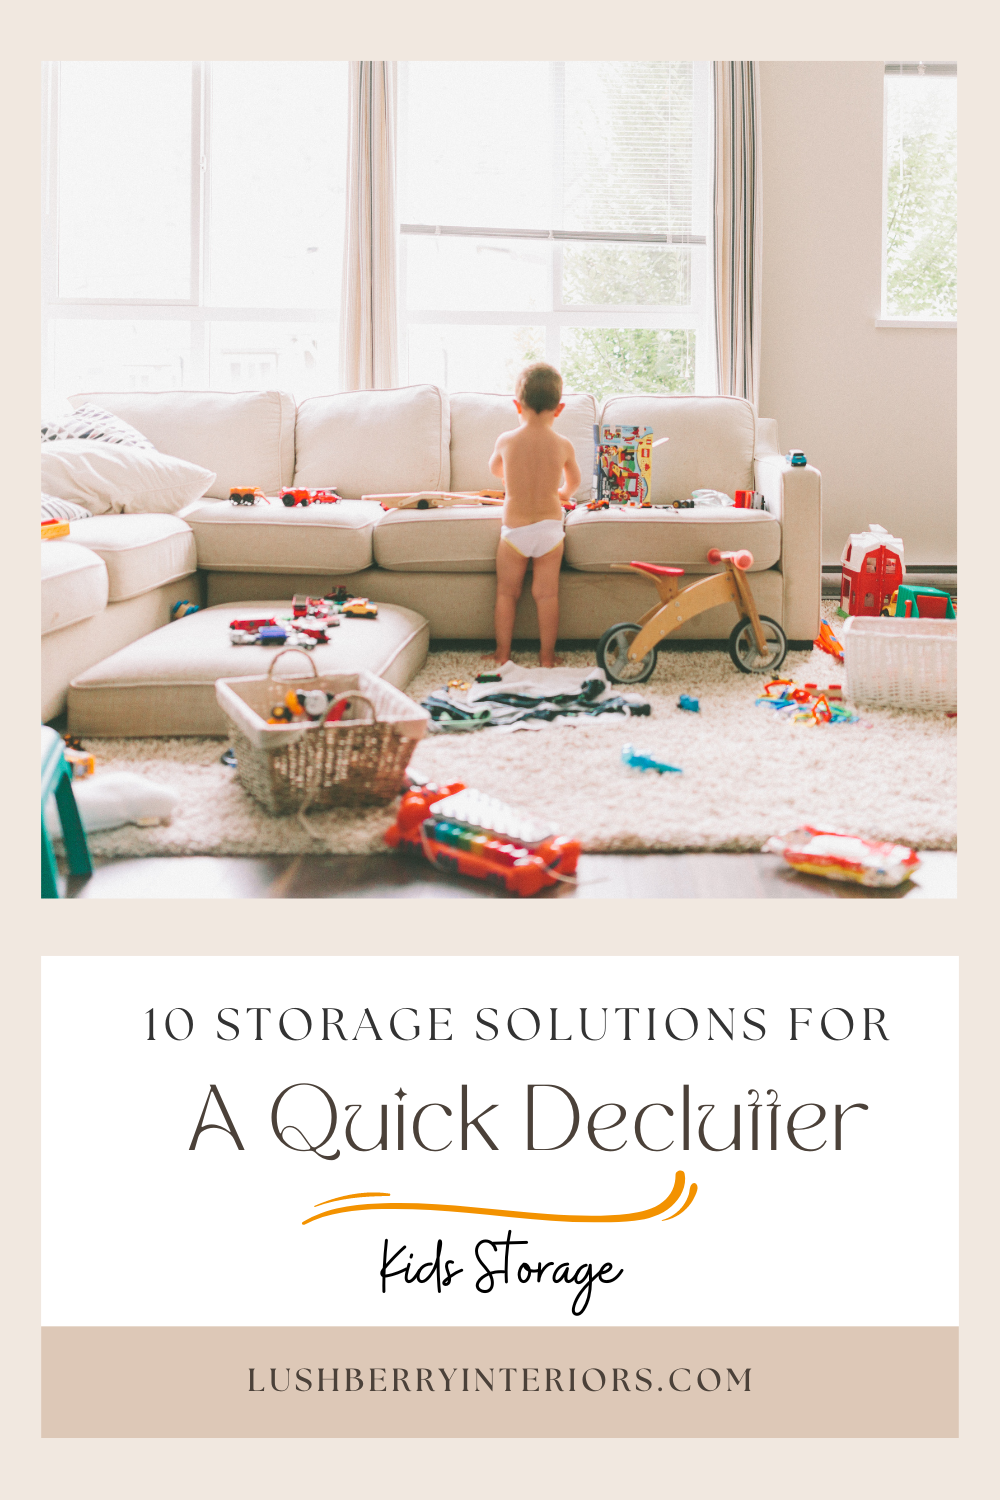 10 Storage Solutions for a Quick Declutter